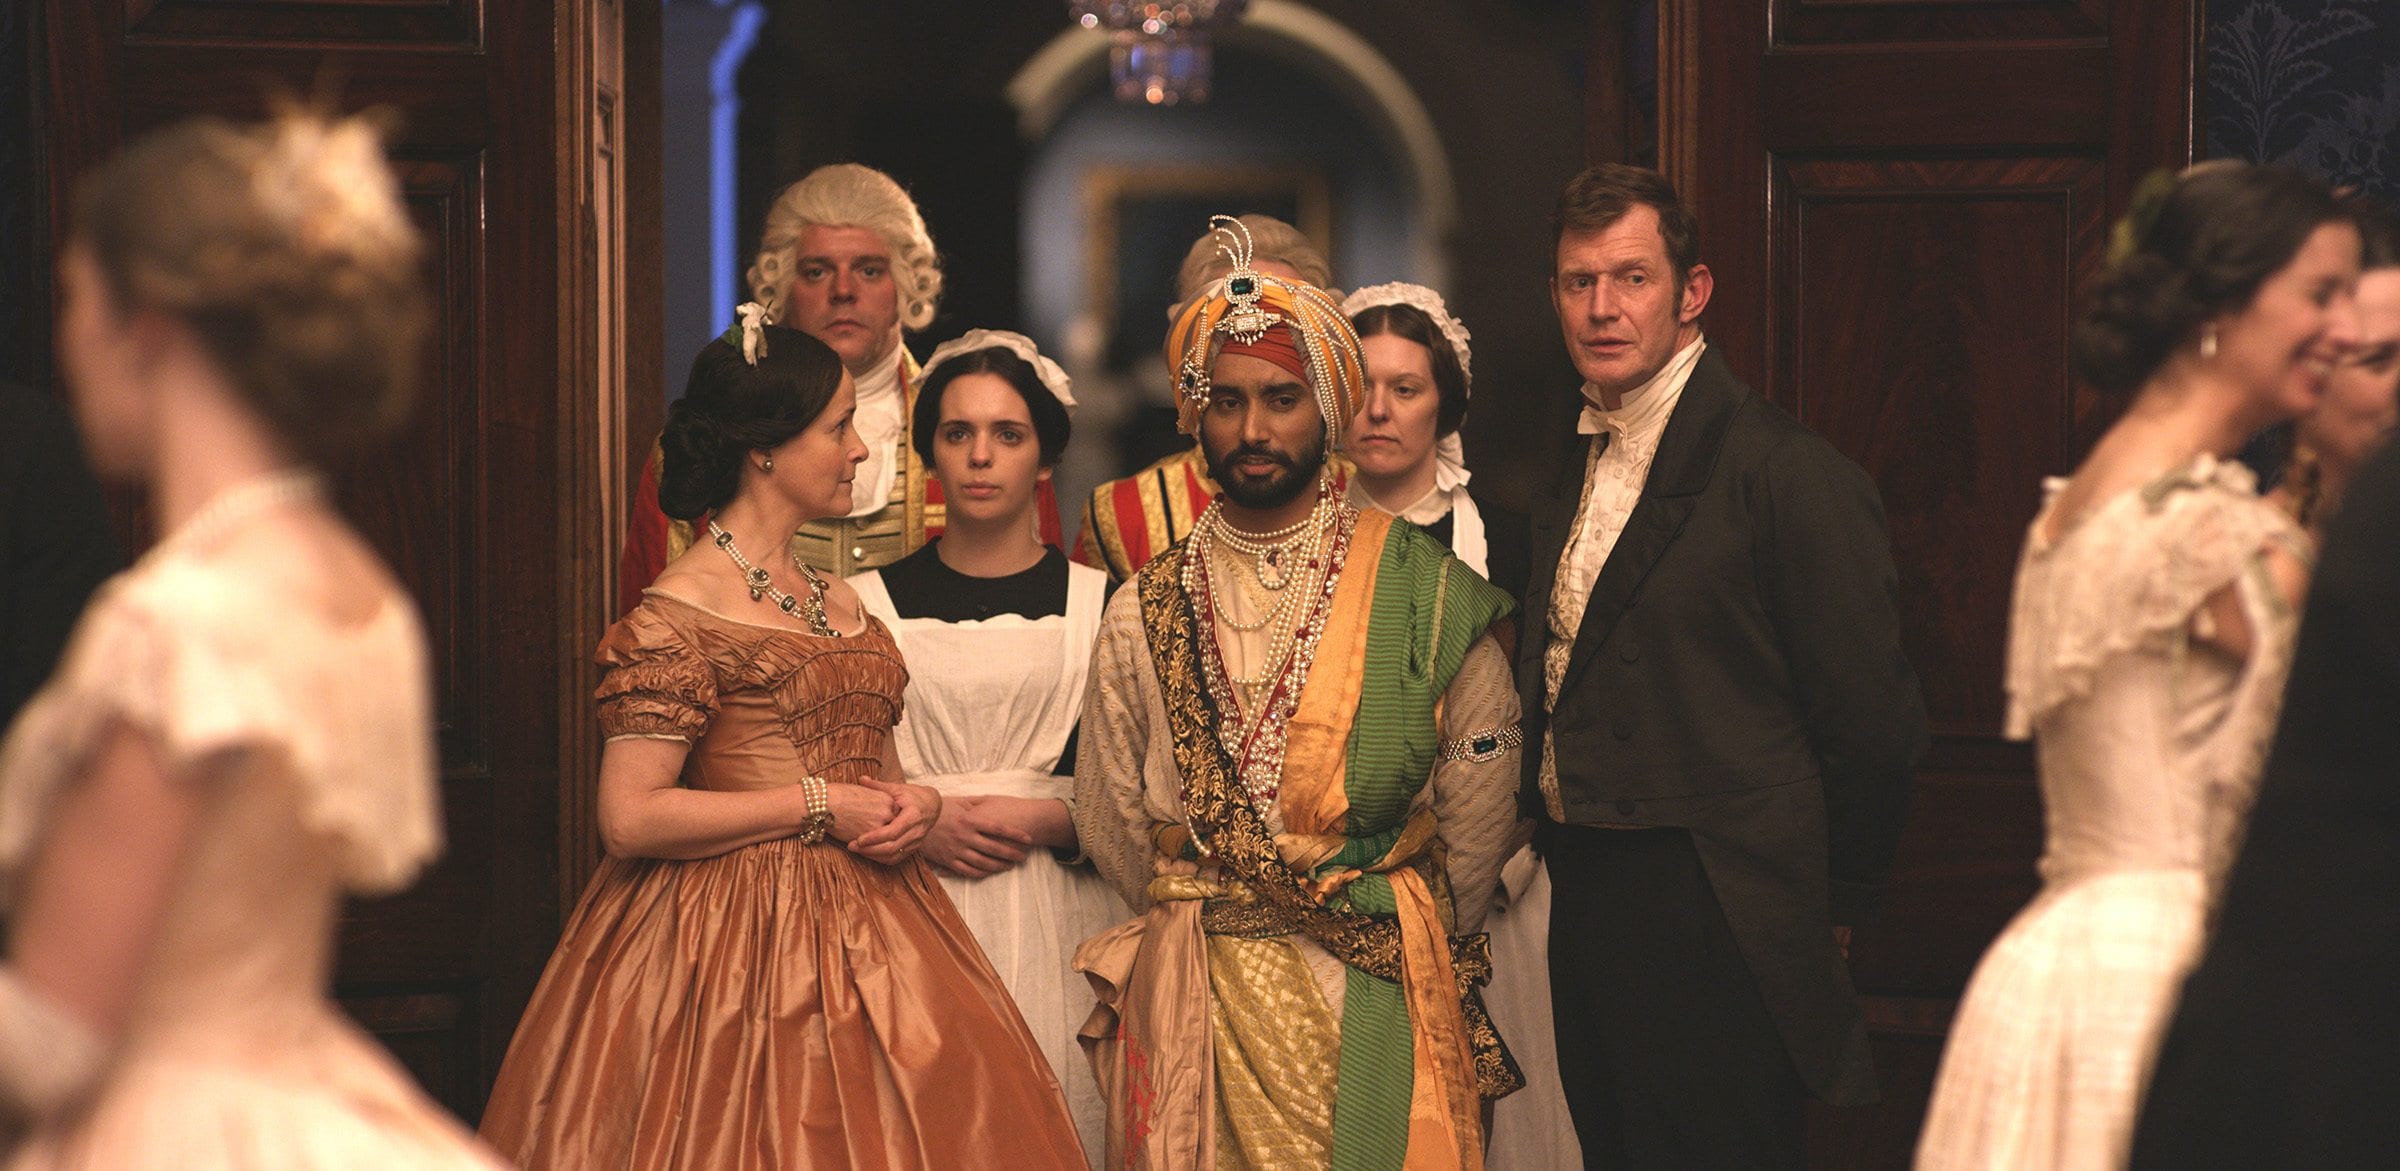 Brillstein Entertainment has debuted the first trailer for Kavi Raz’s 'The Black Prince' during a special presentation at the 2017 Cannes Film Festival.